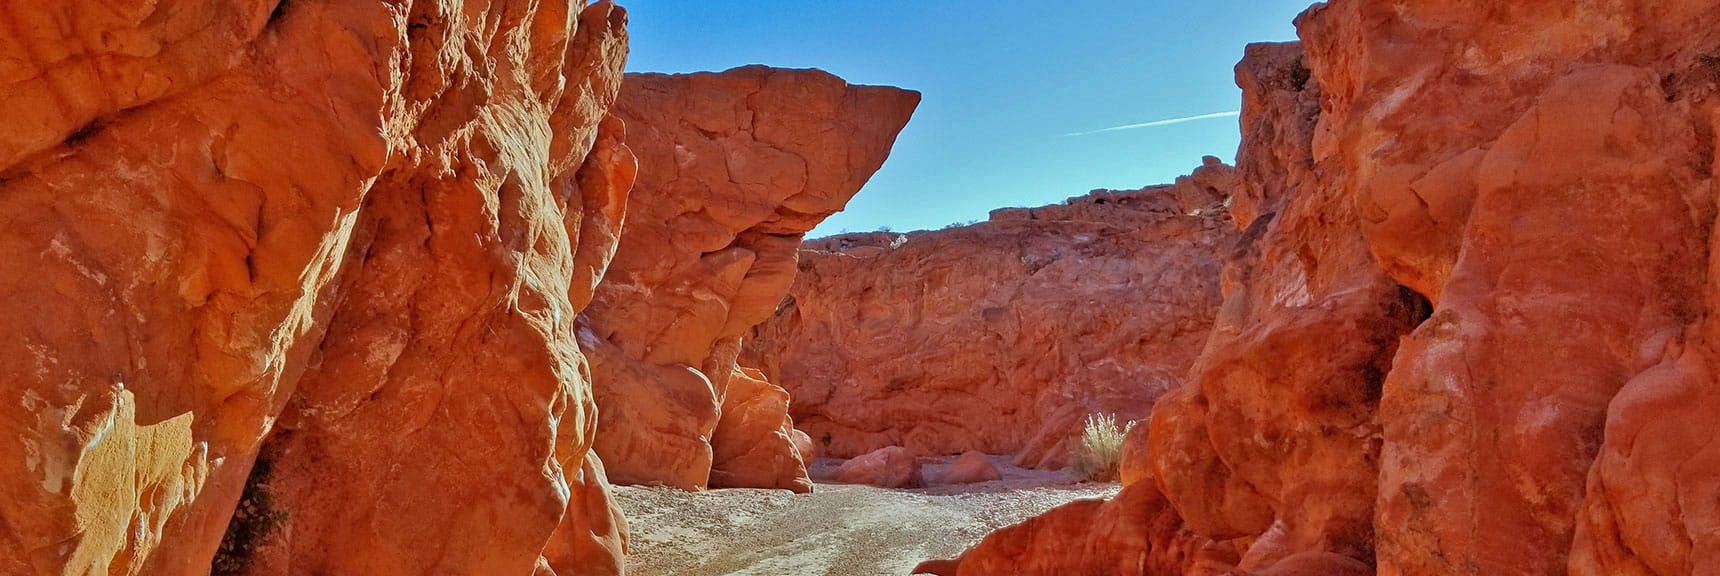 Charlies Spring Trail | Valley of Fire State Park, Nevada